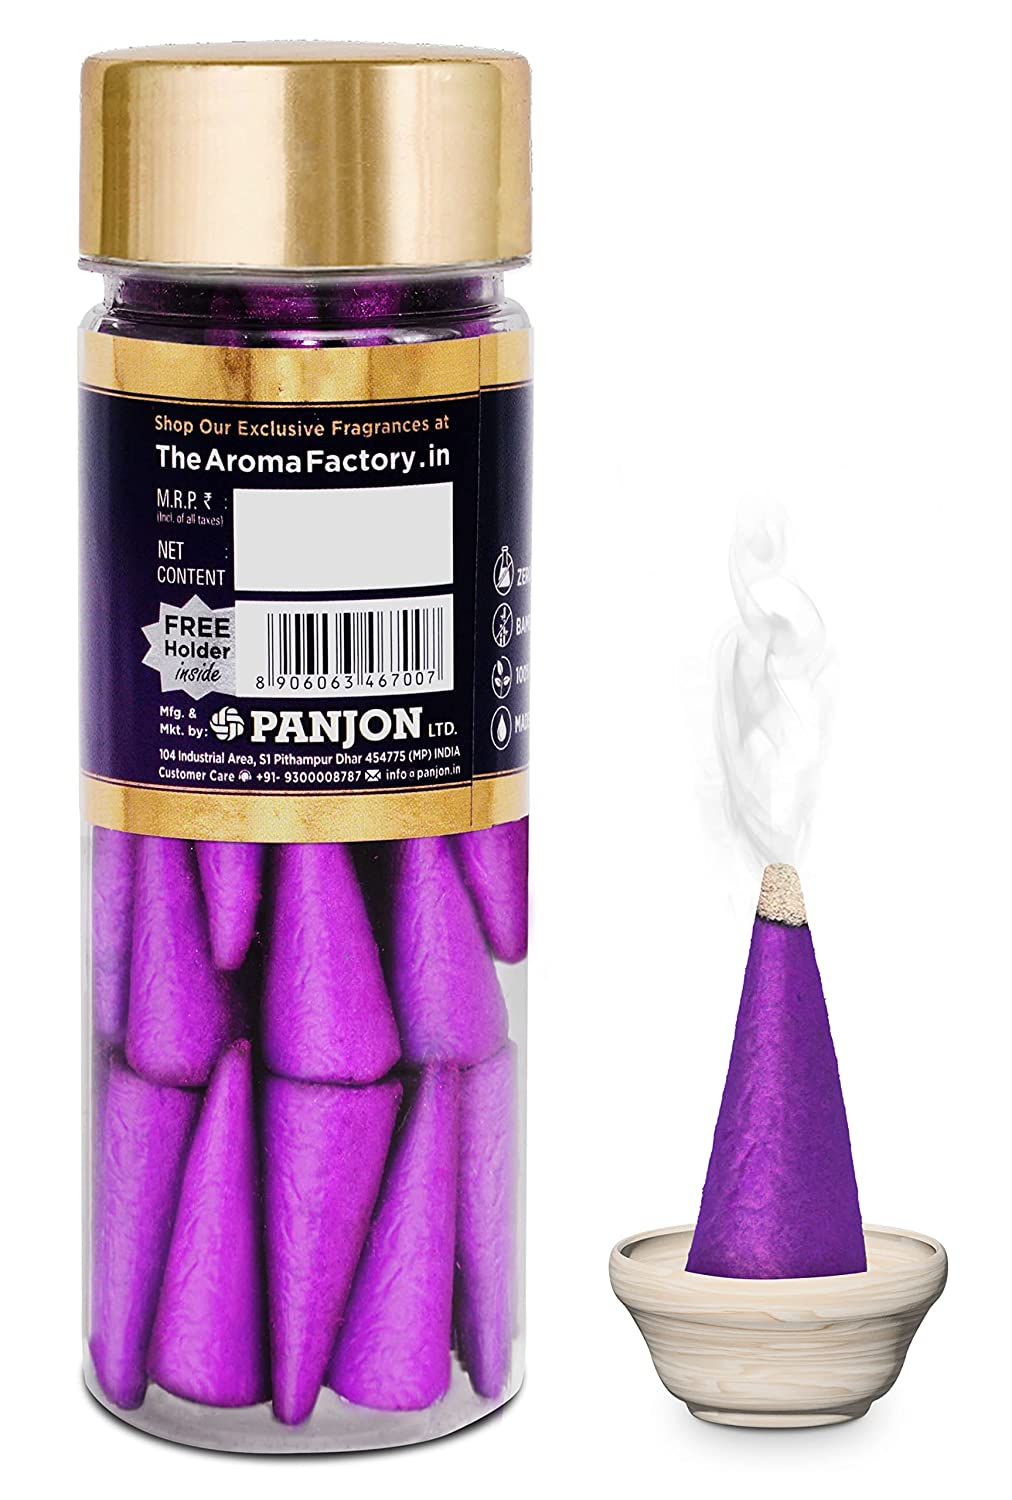 The Aroma Factory Incense Dhoop Cone for Pooja, Mogra (100% Herbal & 0% Charcoal) 1 Bottle x 30 Cones